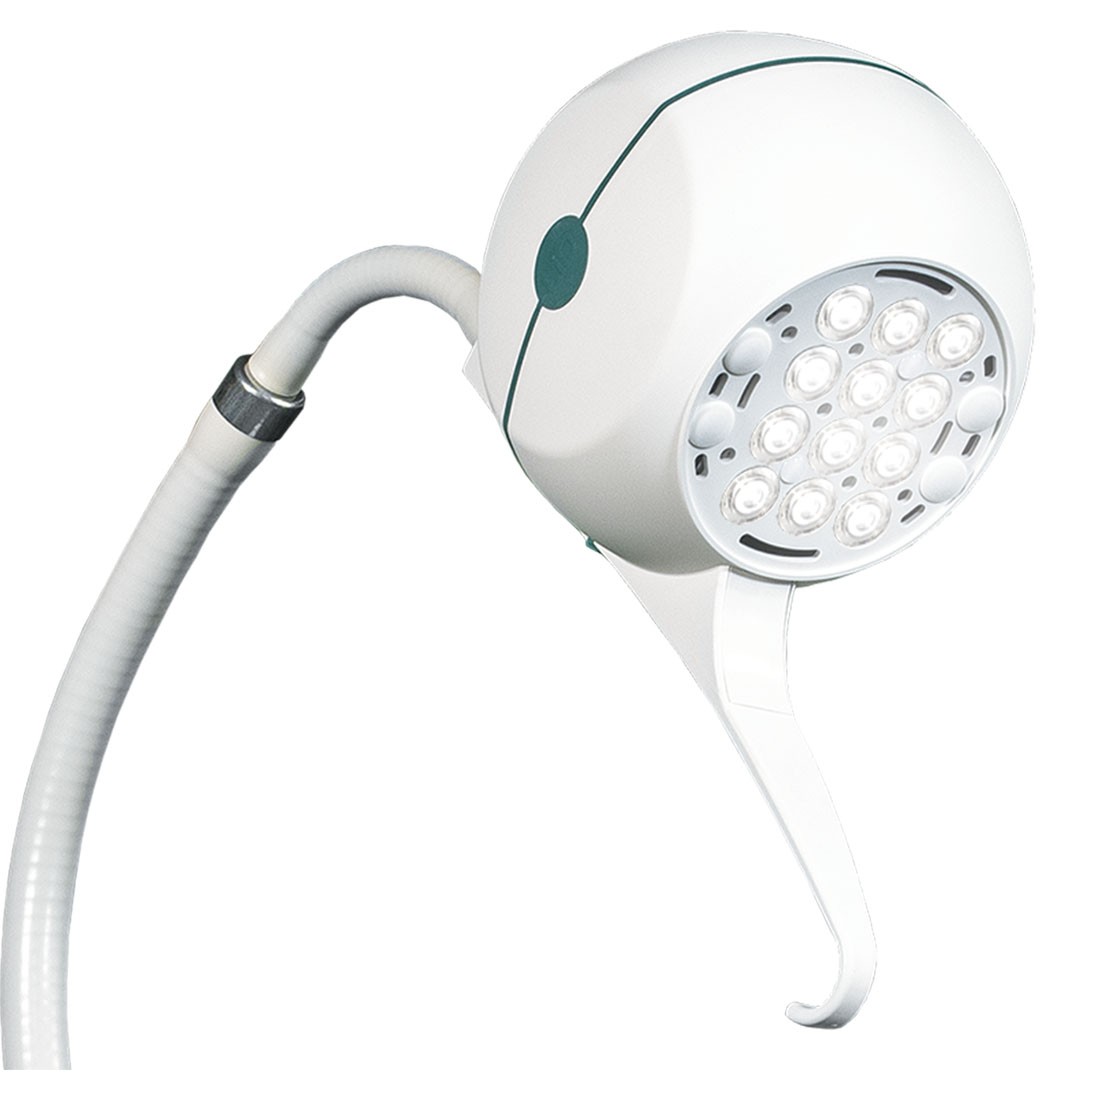 17w-led-lamp-for-dermatology-and-plastic-surgery.jpg